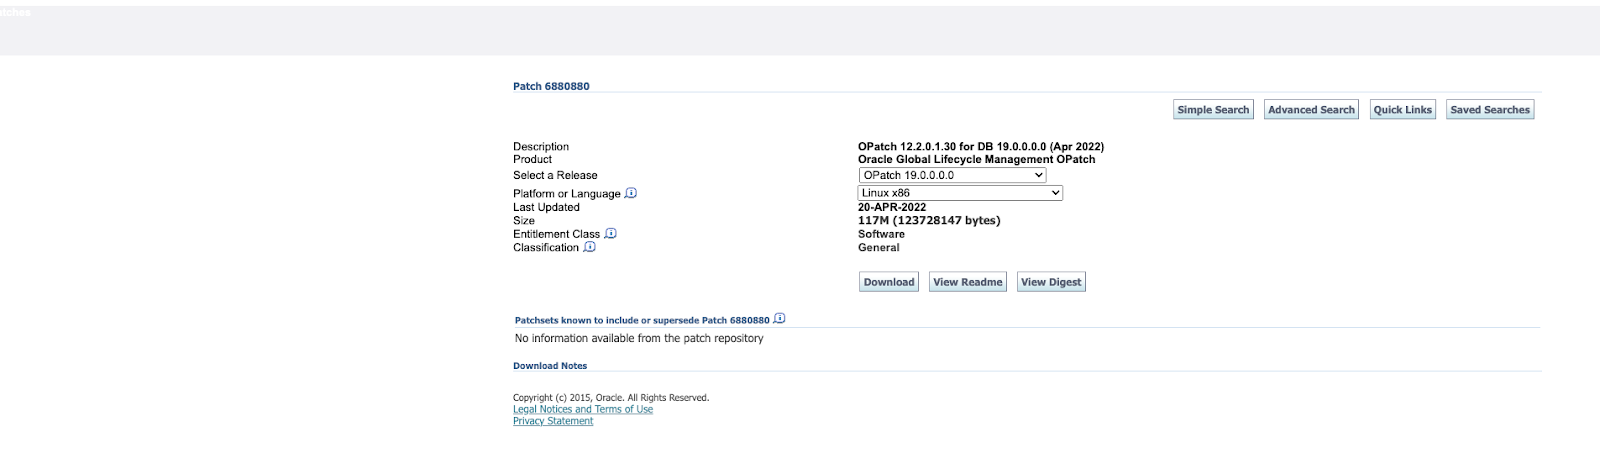 Oracle OPatch page showing the patch description, date, and size.